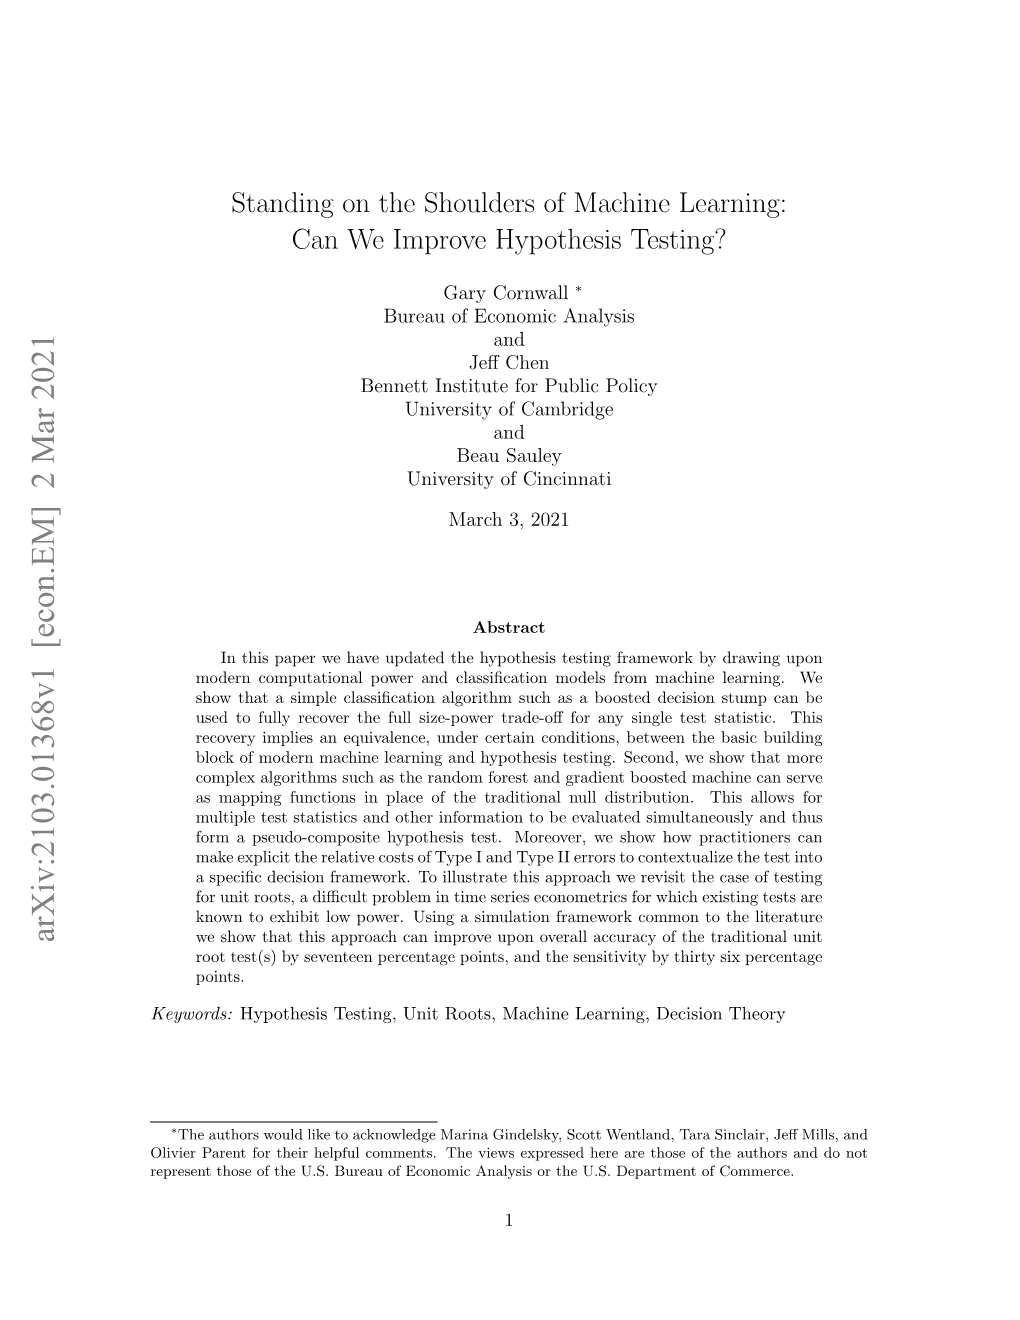 Standing on the Shoulders of Machine Learning: Can We Improve Hypothesis Testing?